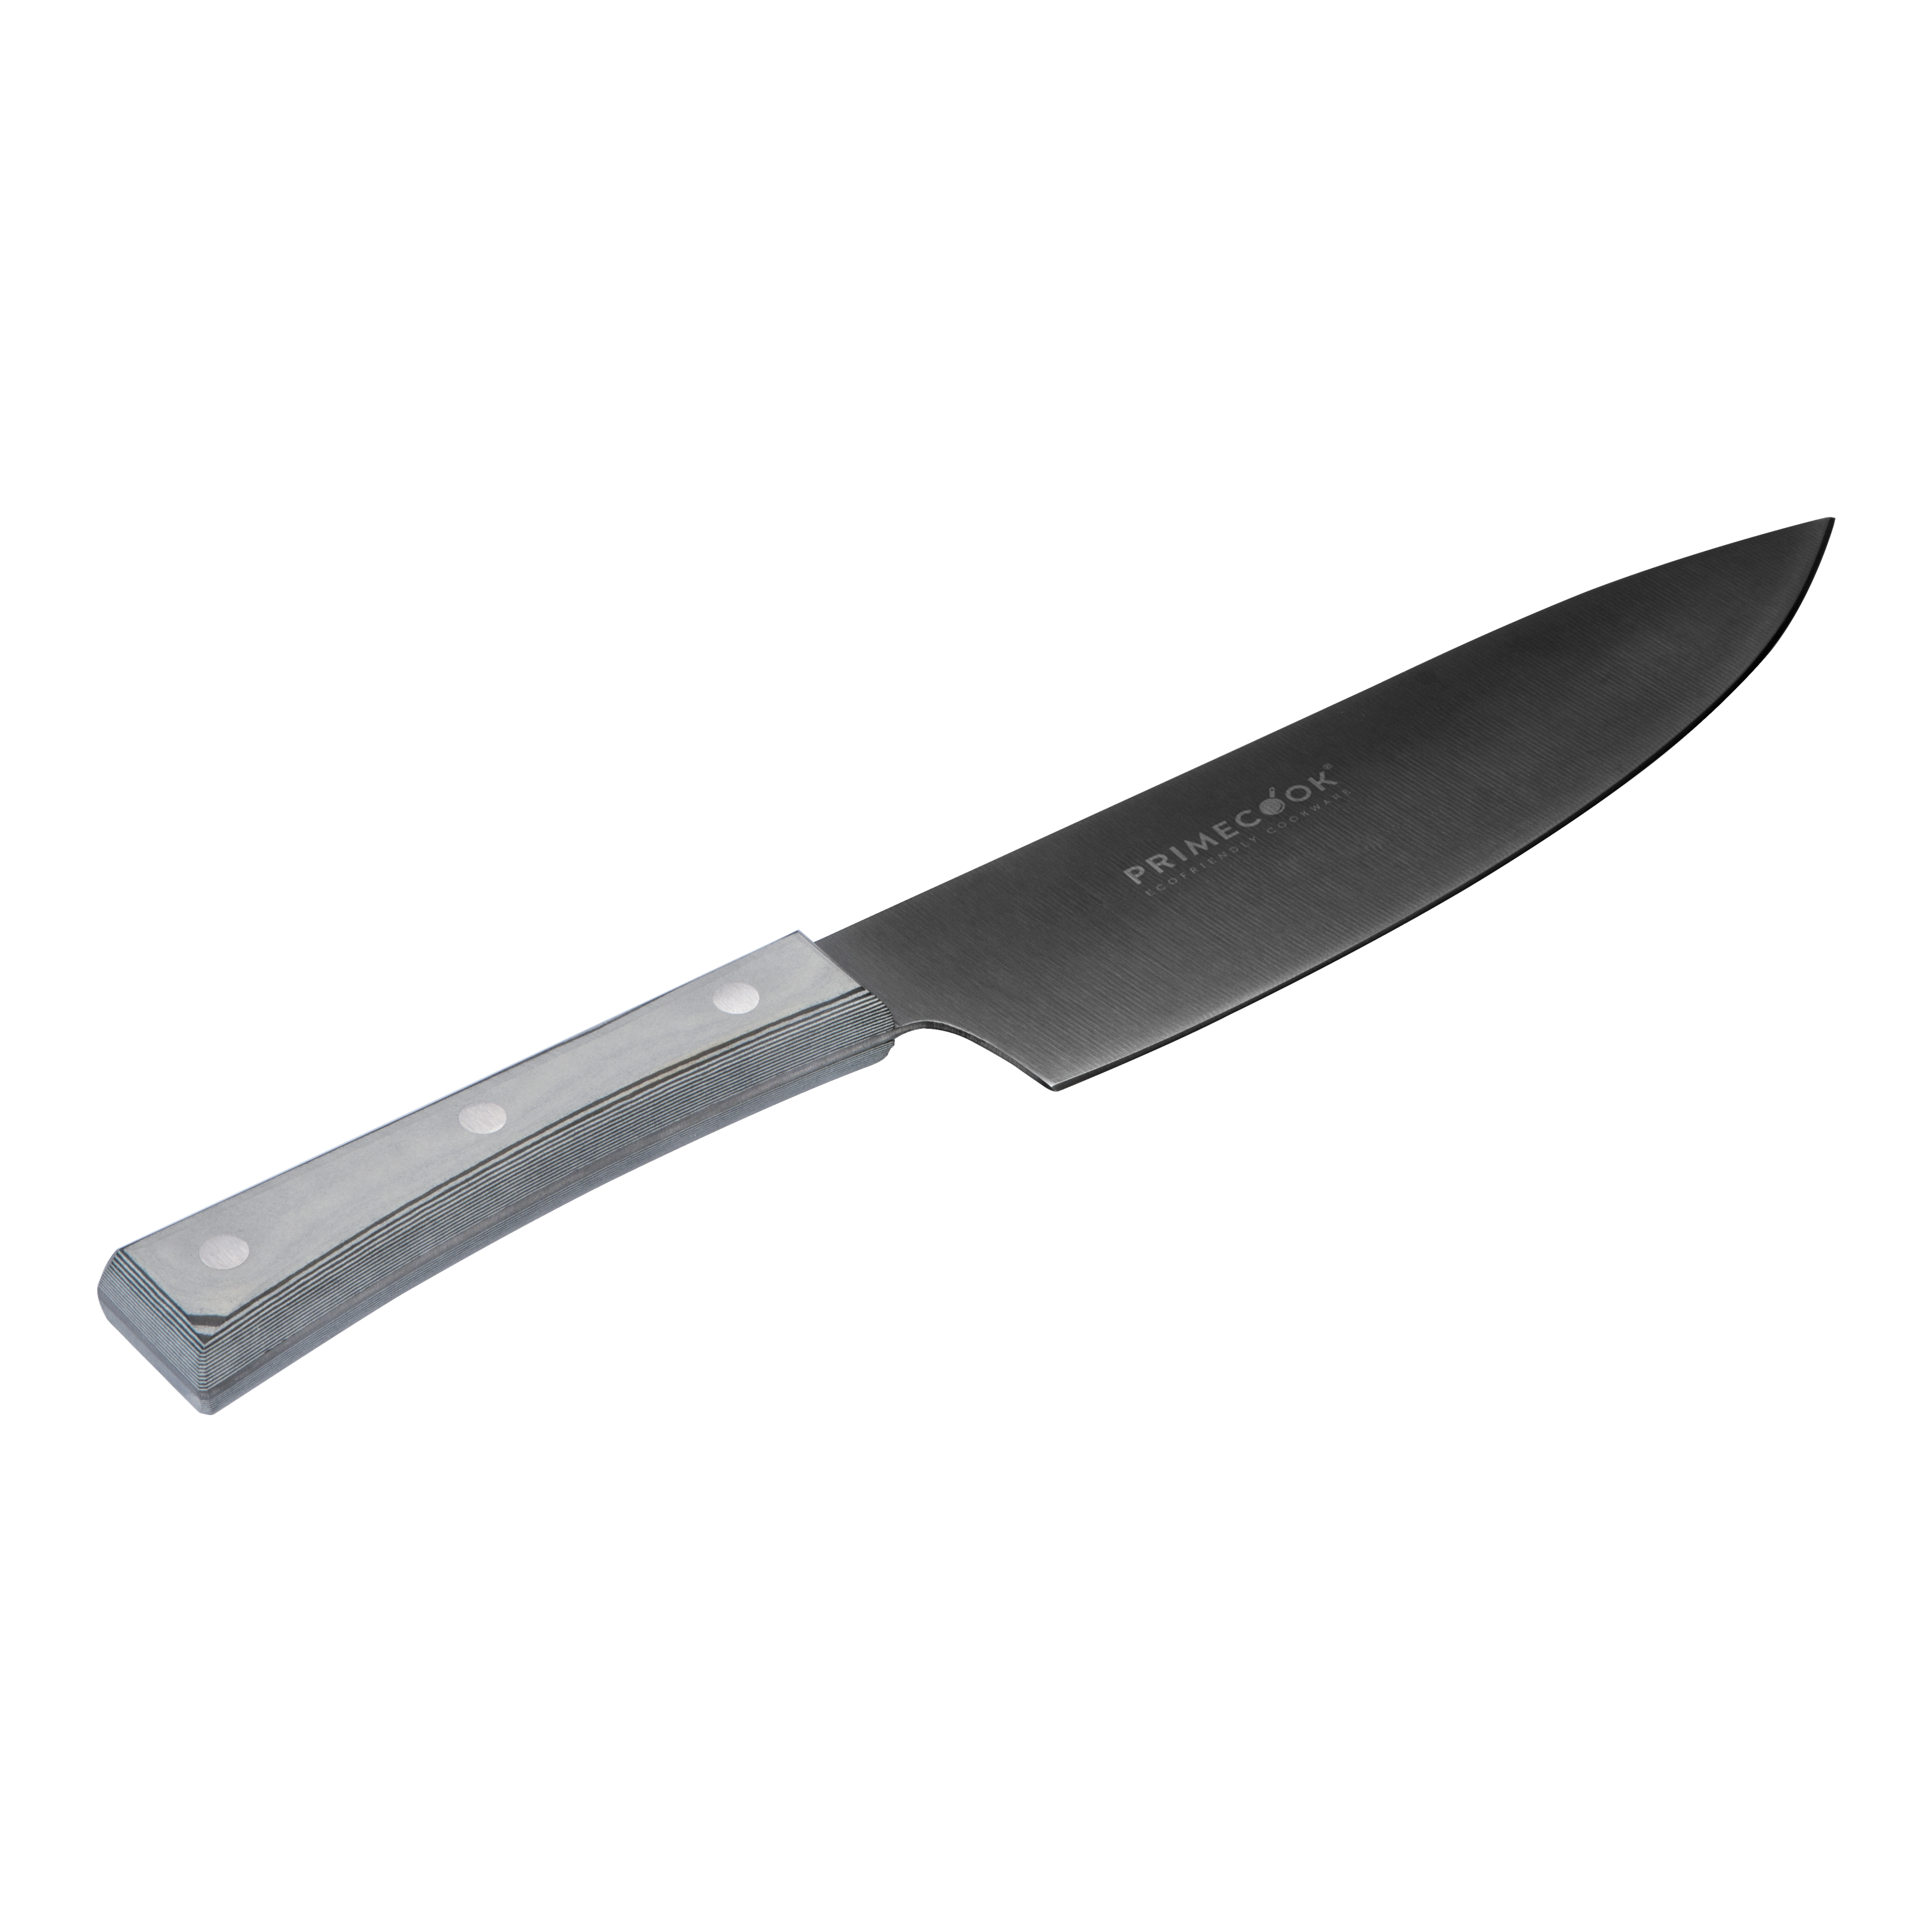 Professional Cook’s Knife - 8 in